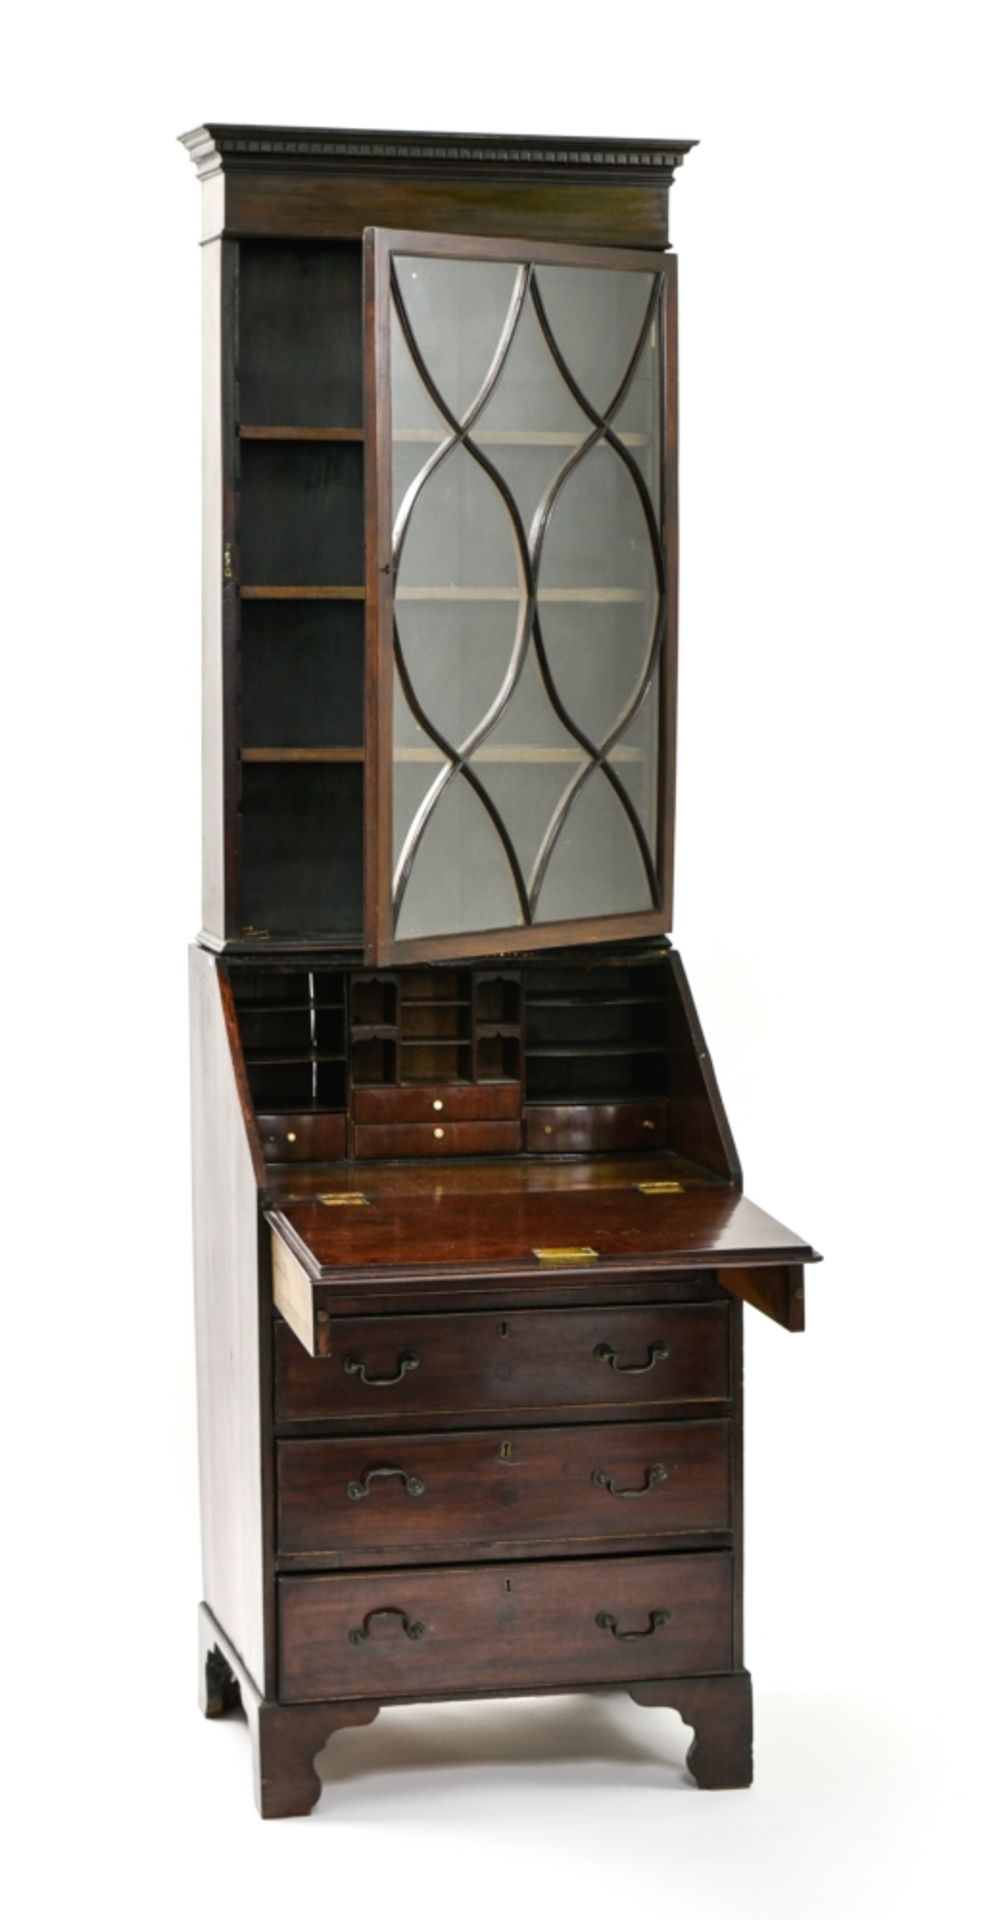 Display case 19TH CENTURY ENGLISH WORK stained and varnished mahogany H : 207 cm Width : 62 cm Depth